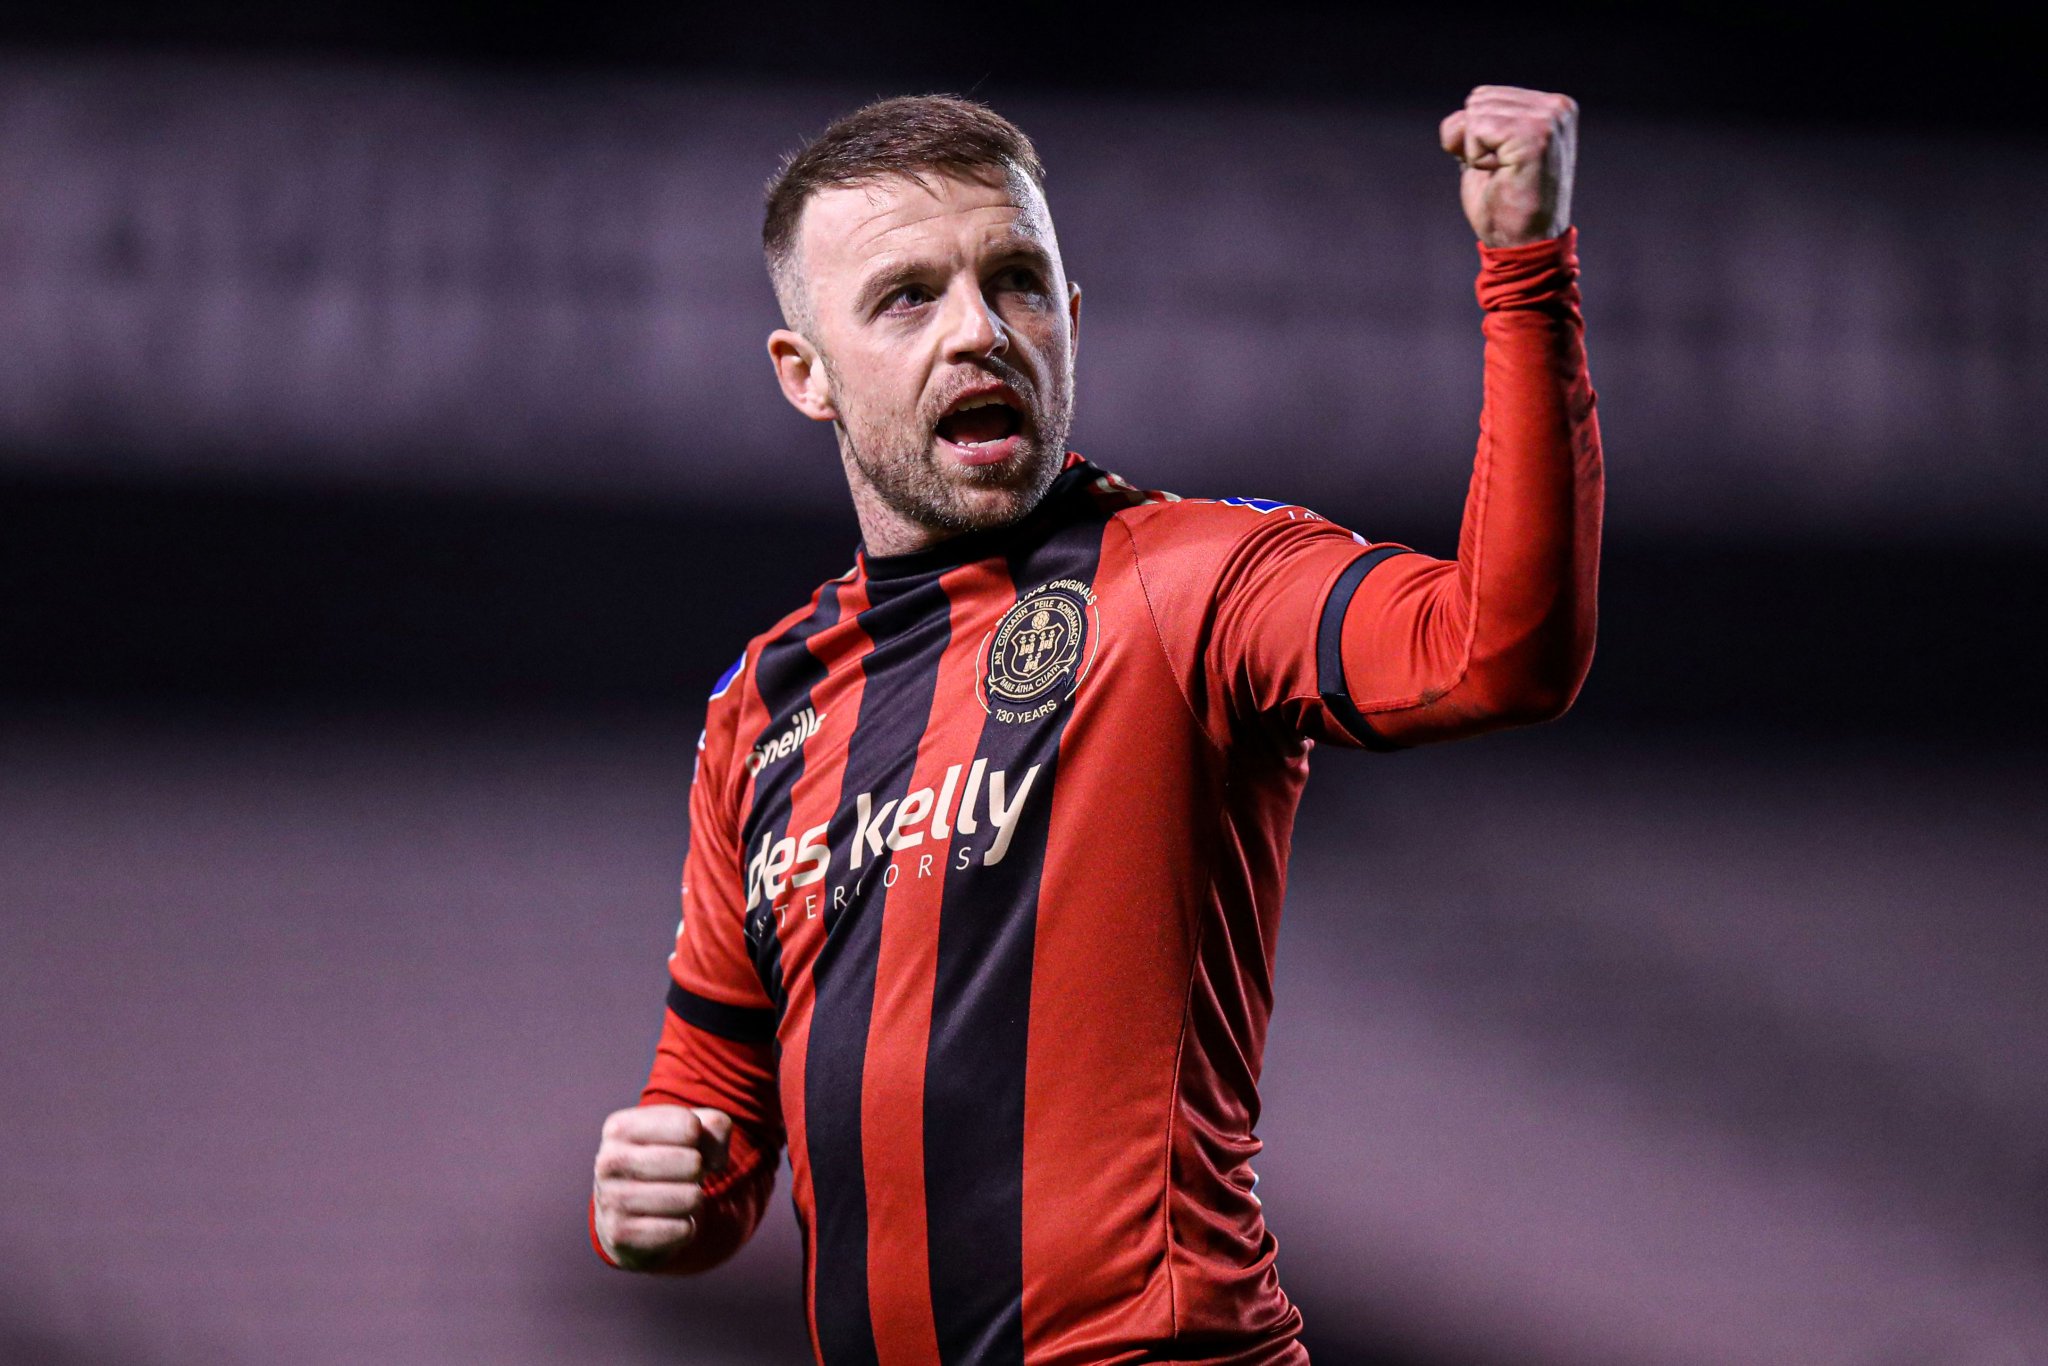 Bohemian Football Club On Twitter Bohemians Are Delighted To Confirm The Signing Of Left Back Tyreke Wilson From Waterford And To Confirm That Midfielder Keith Ward Has Re Signed For 2021 S T Co Rt1qg7sac3